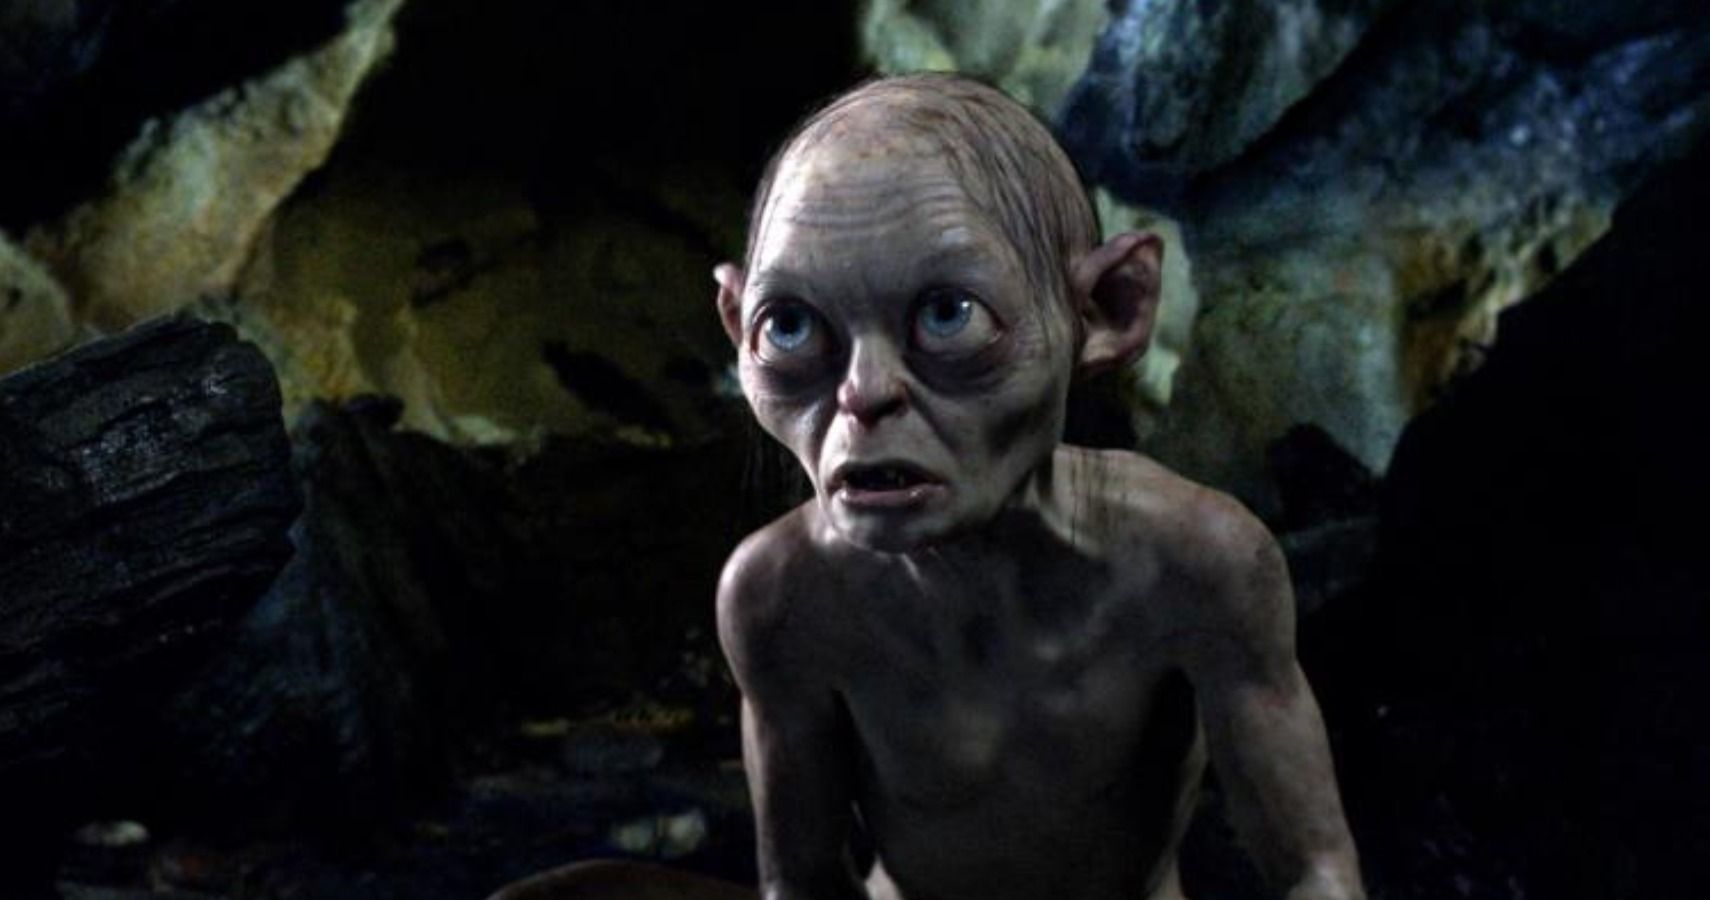 who wrote the lord of the rings The Hunt for Gollum